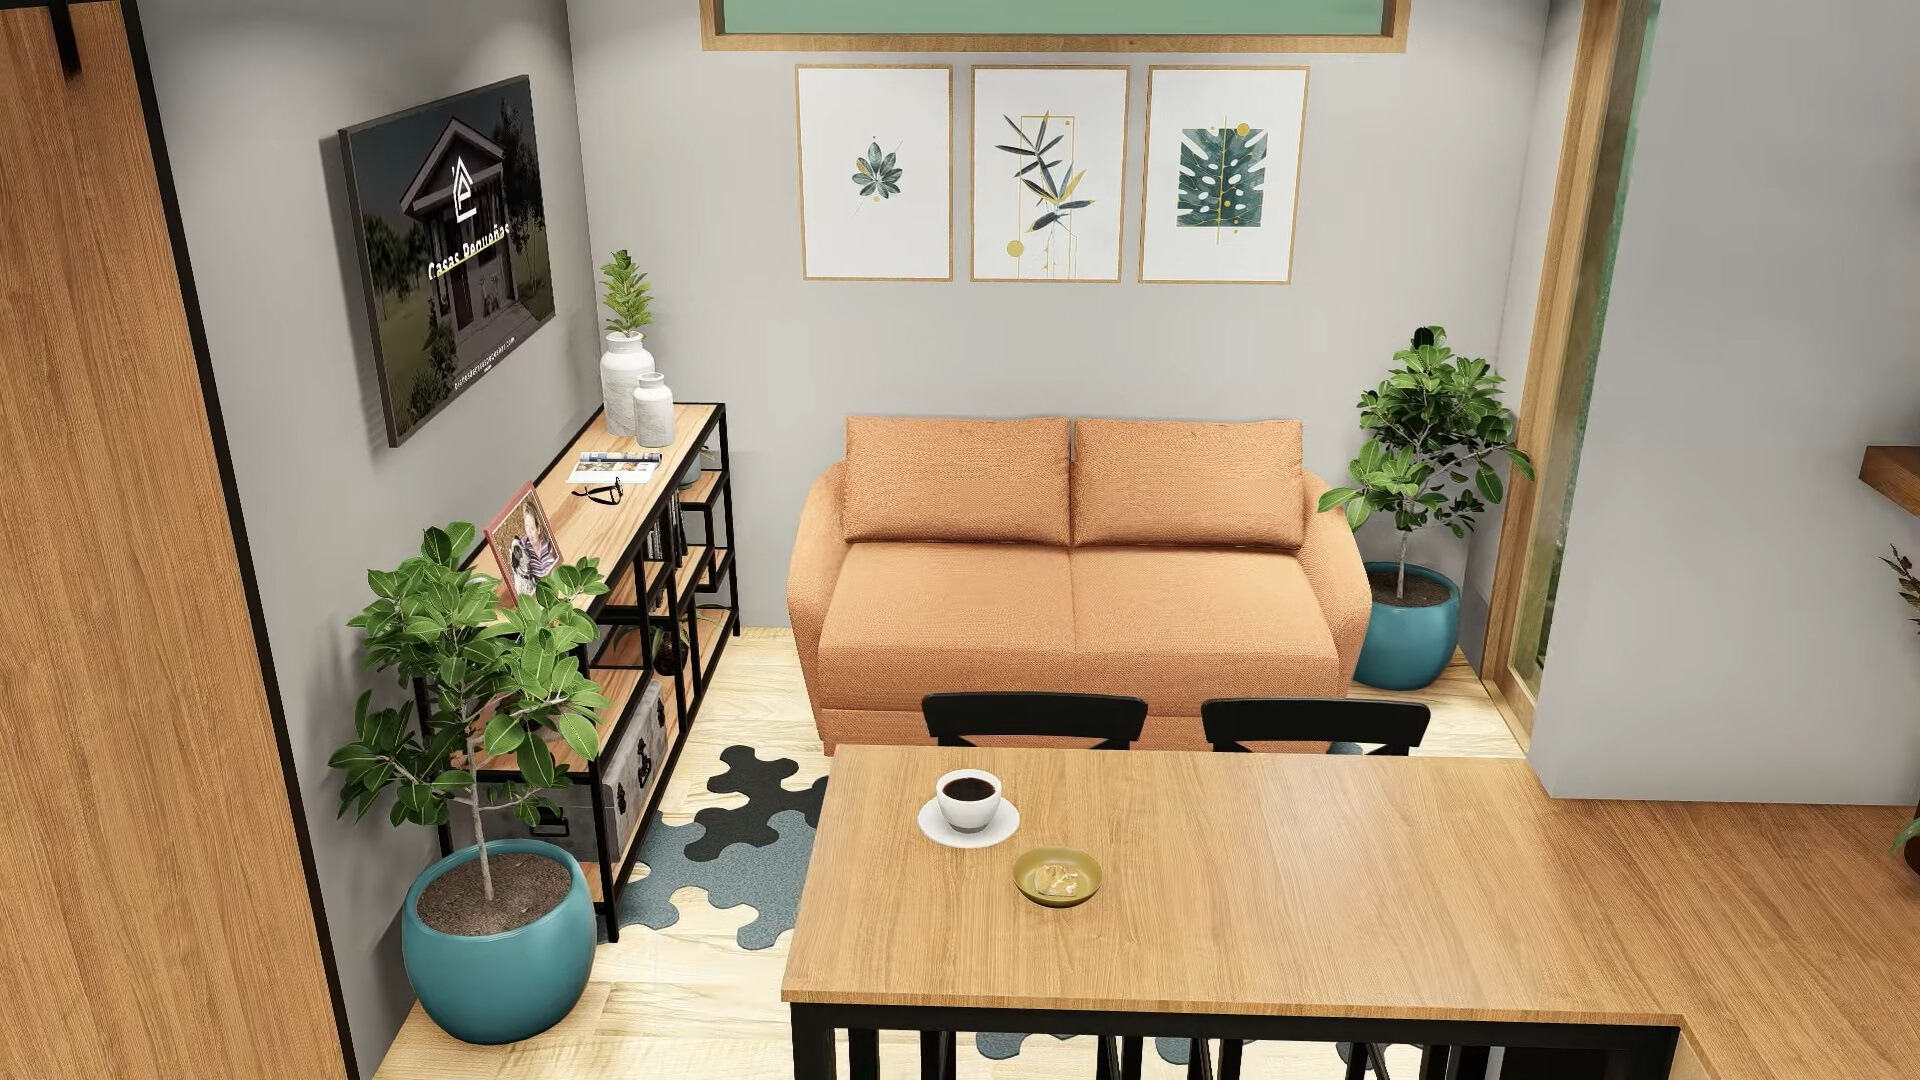 living room with an orange sofa, flat screen tv, plants and dining table